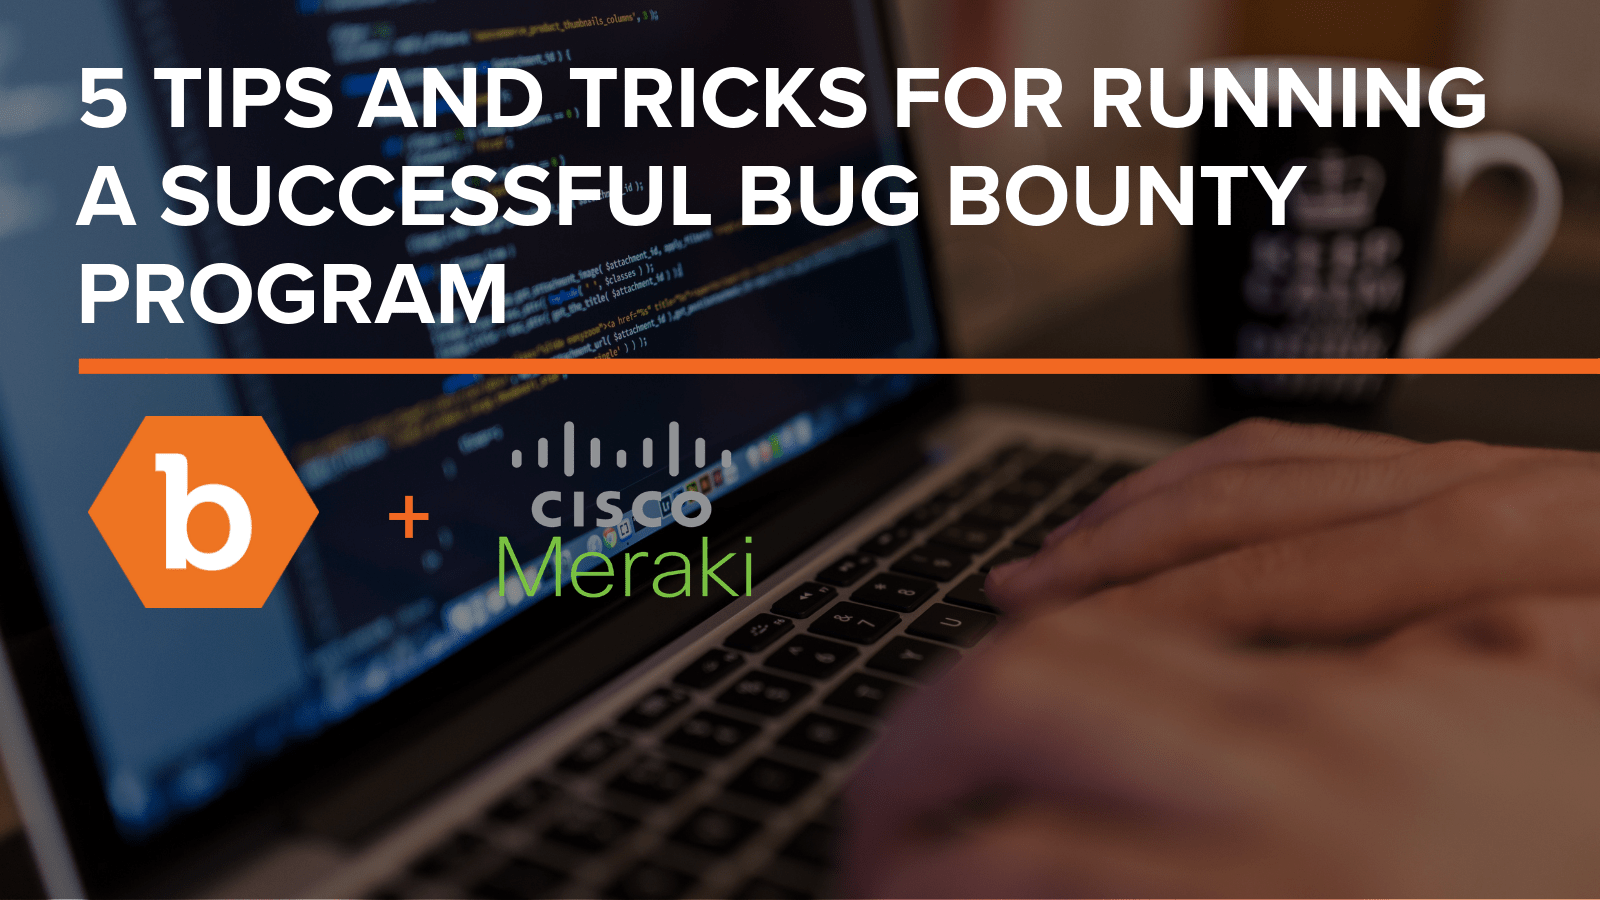 5 Tips and Tricks for Running a Successful Bug Bounty Program